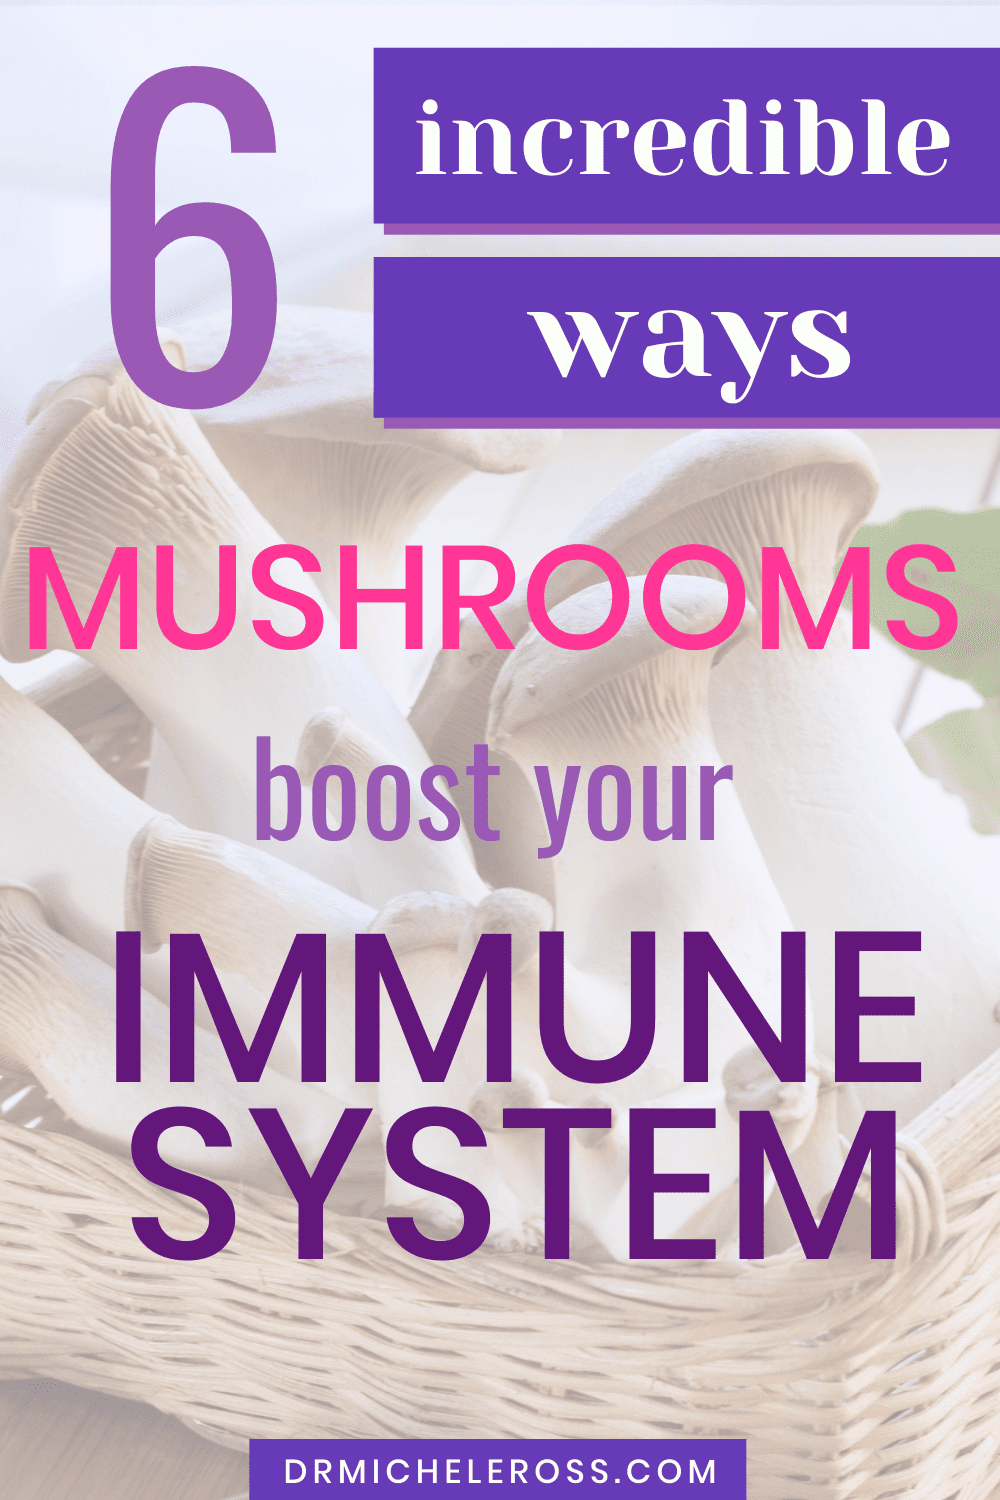 6 Incredible Ways Mushrooms Boost The Immune System